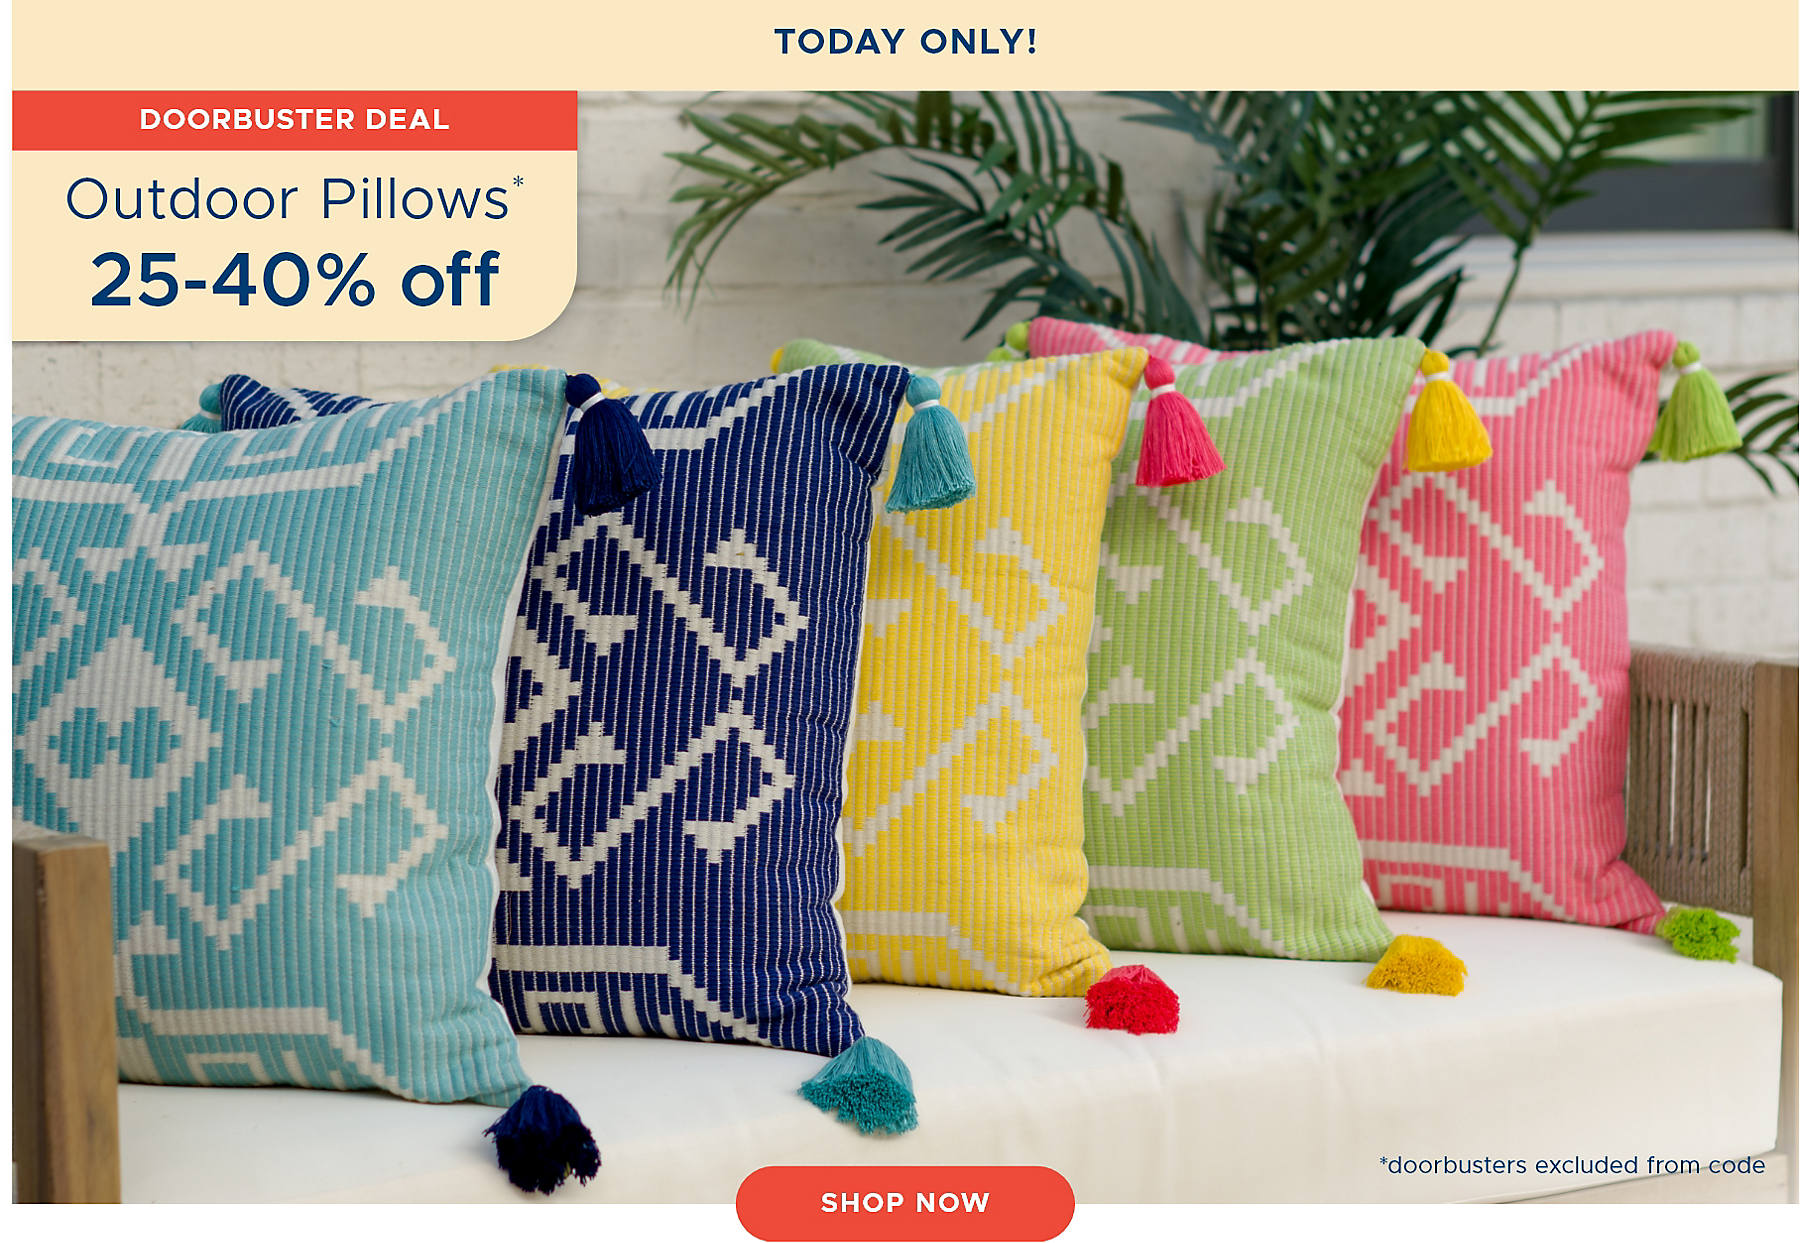  Outdoor Pillows 25-40% off *doorbusters excluded from code shop now